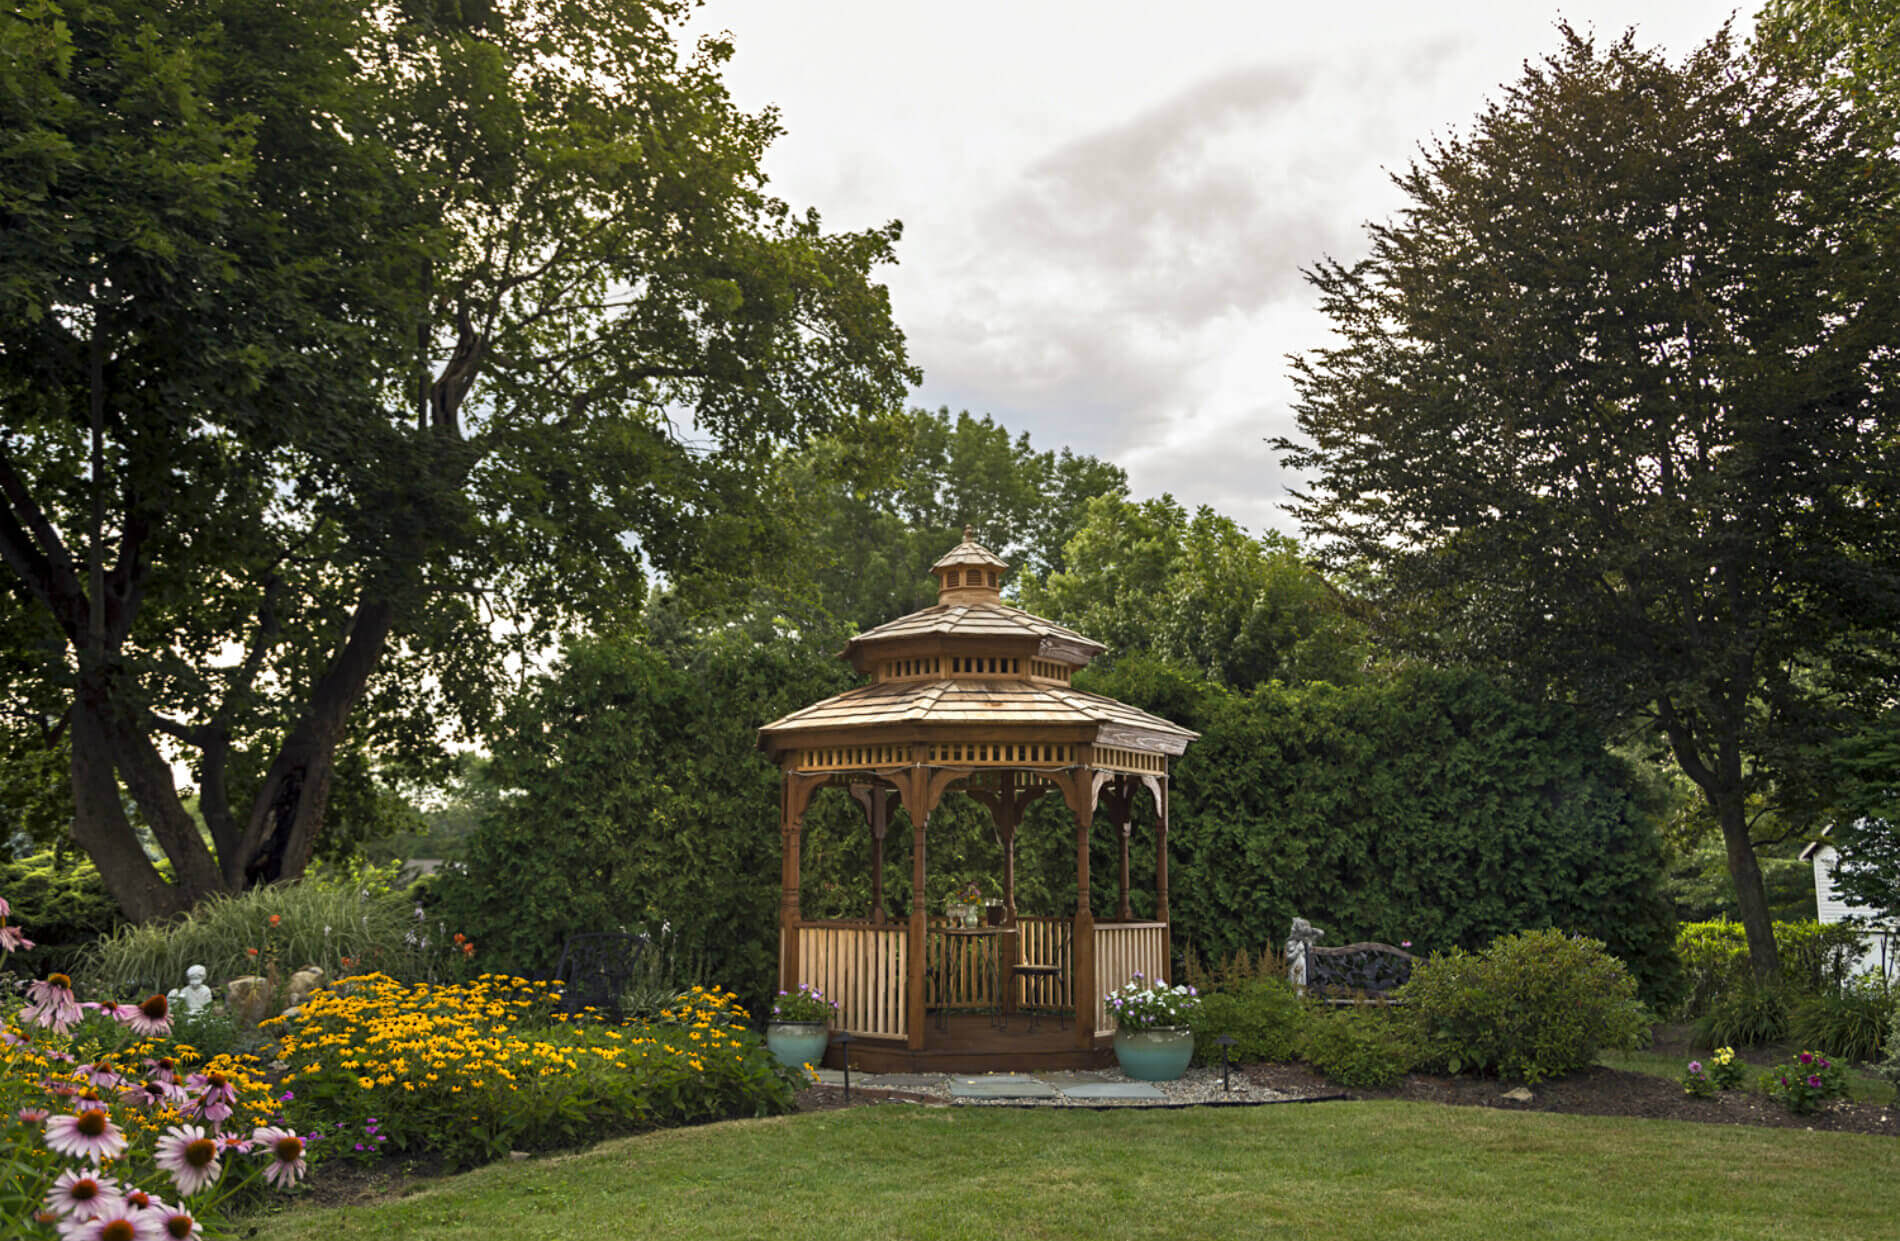 Wooden gazebo surrounded by green trees and lawn with purple and yellow flowers